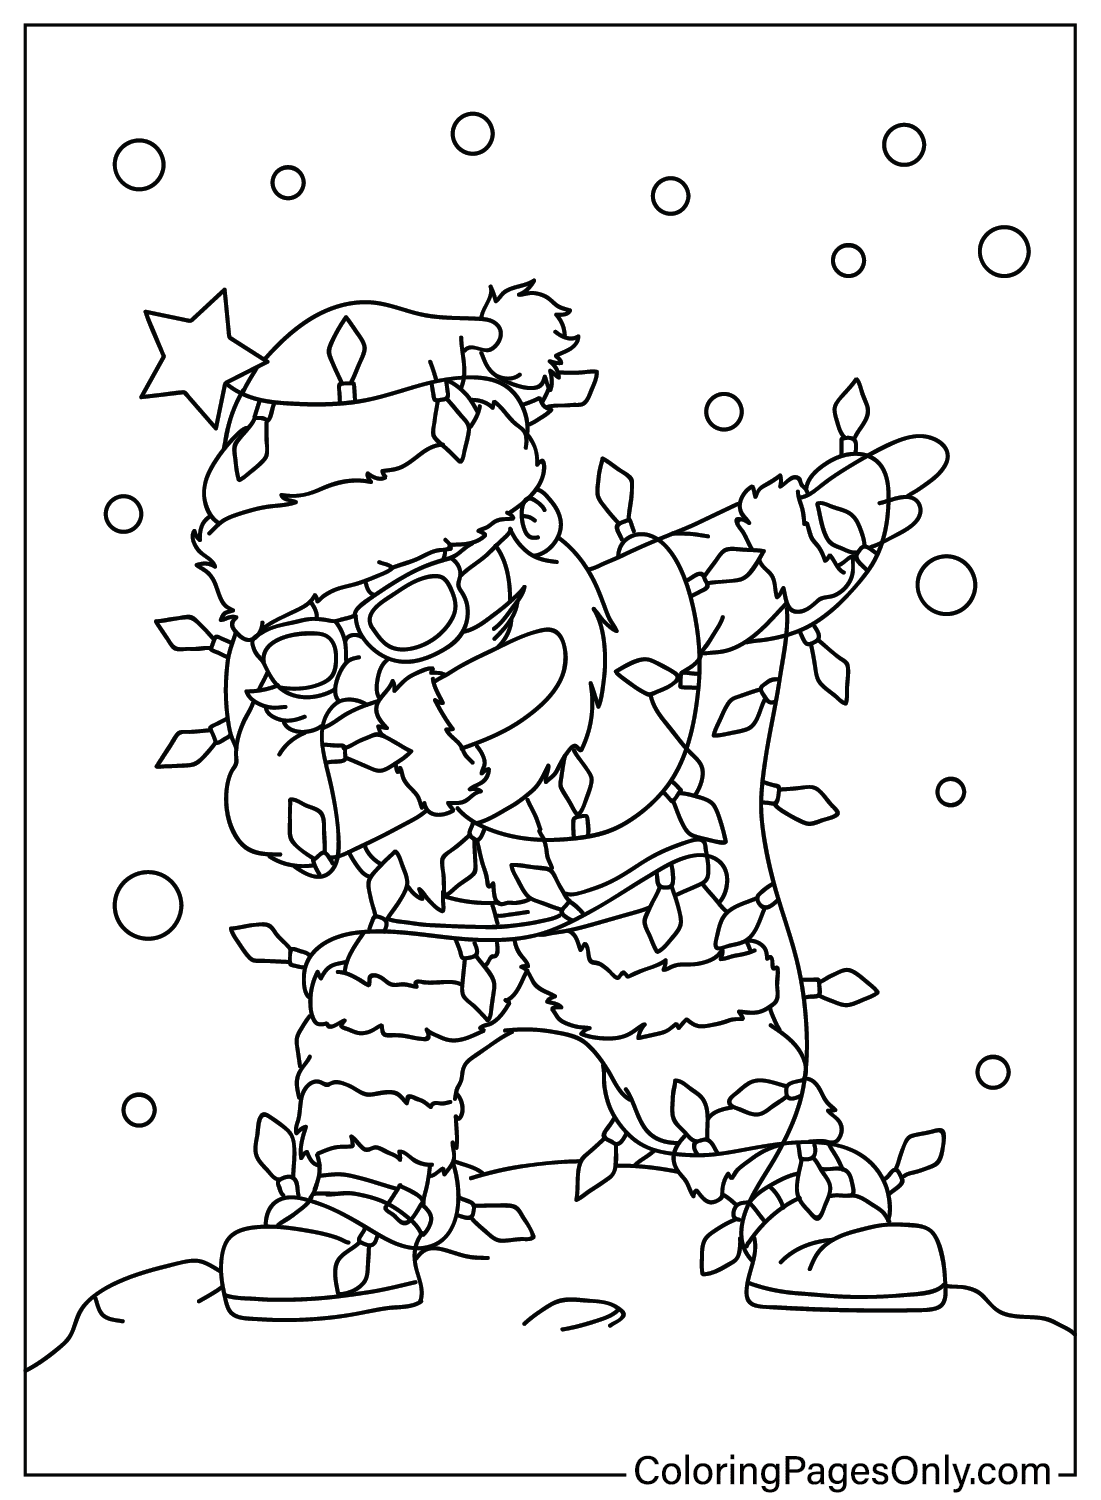 Printable Coloring Pages of Santa Claus